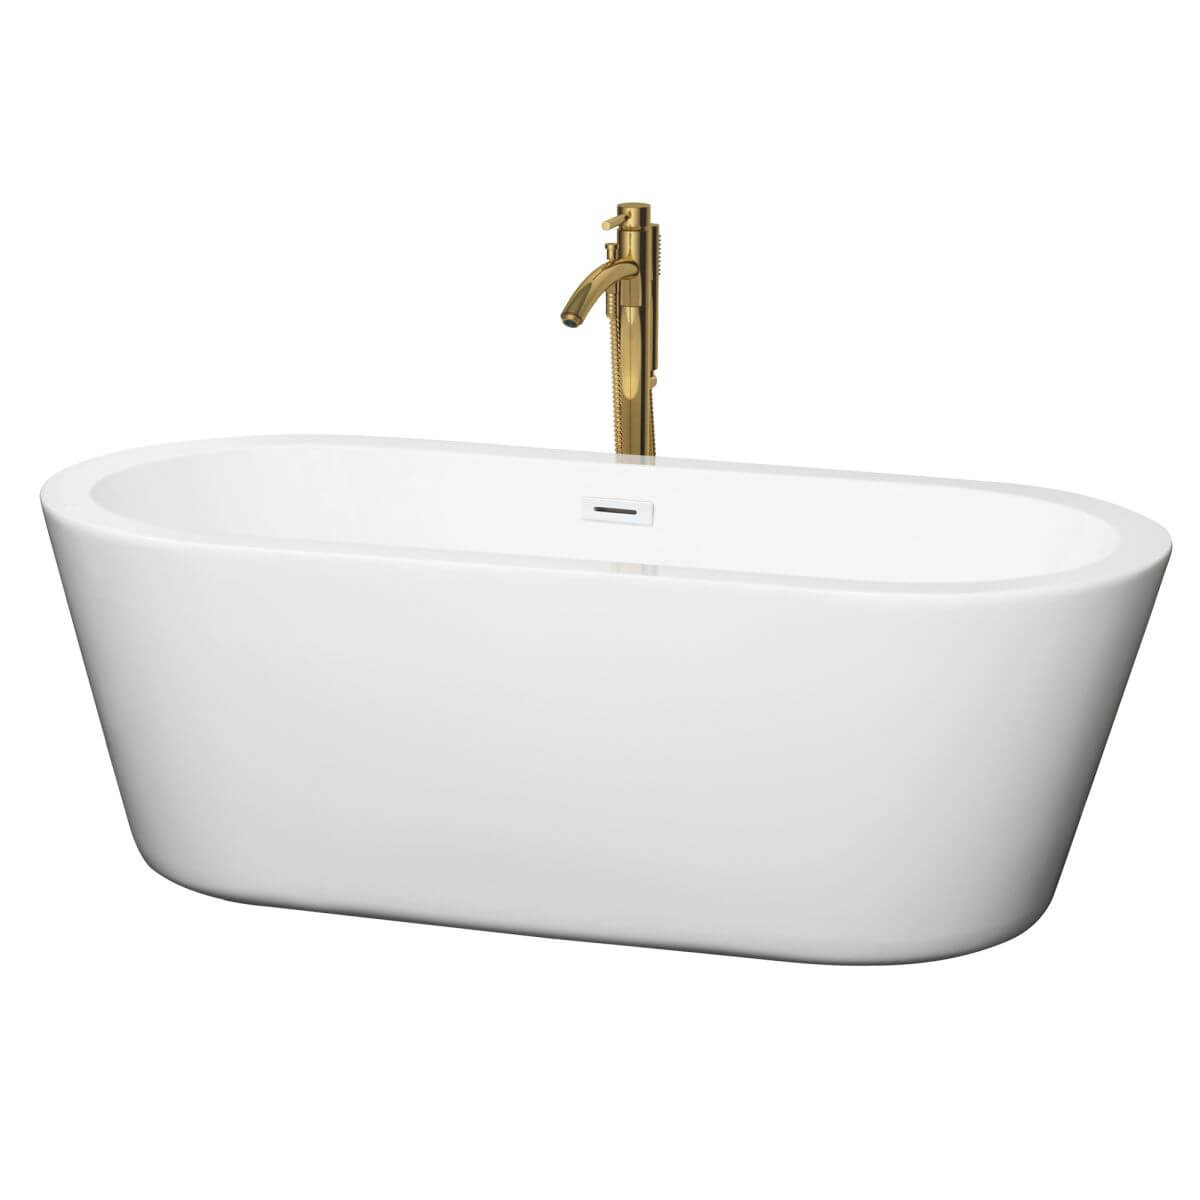 Wyndham Collection Mermaid 67 inch Freestanding Bathtub in White with Shiny White Trim and Floor Mounted Faucet in Brushed Gold - WCOBT100367SWATPGD